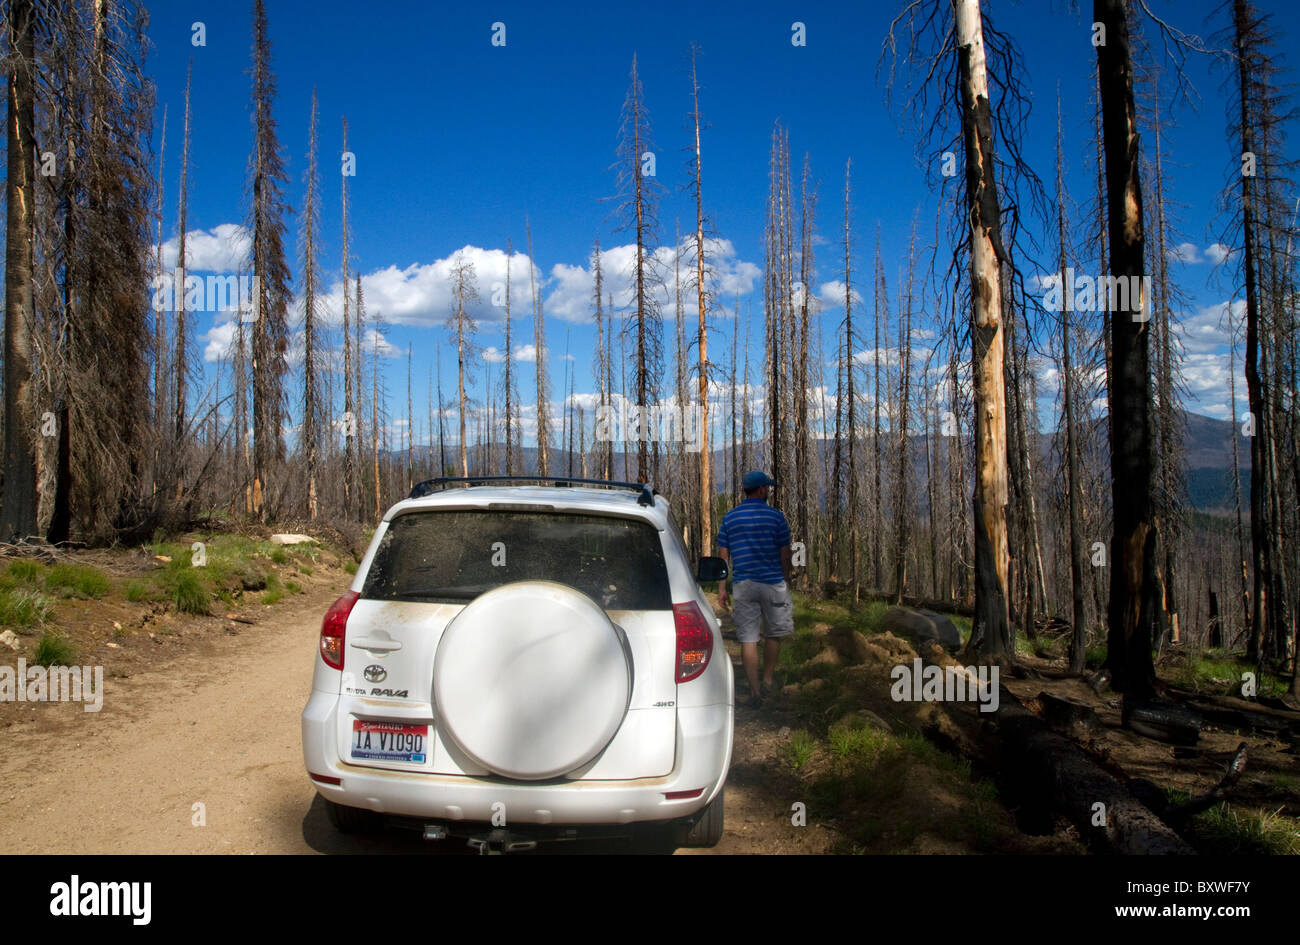 Area burned by forest fire along the Magruder Corridor in the Selway-Bitterwoot Wilderness, Idaho, USA. Stock Photo